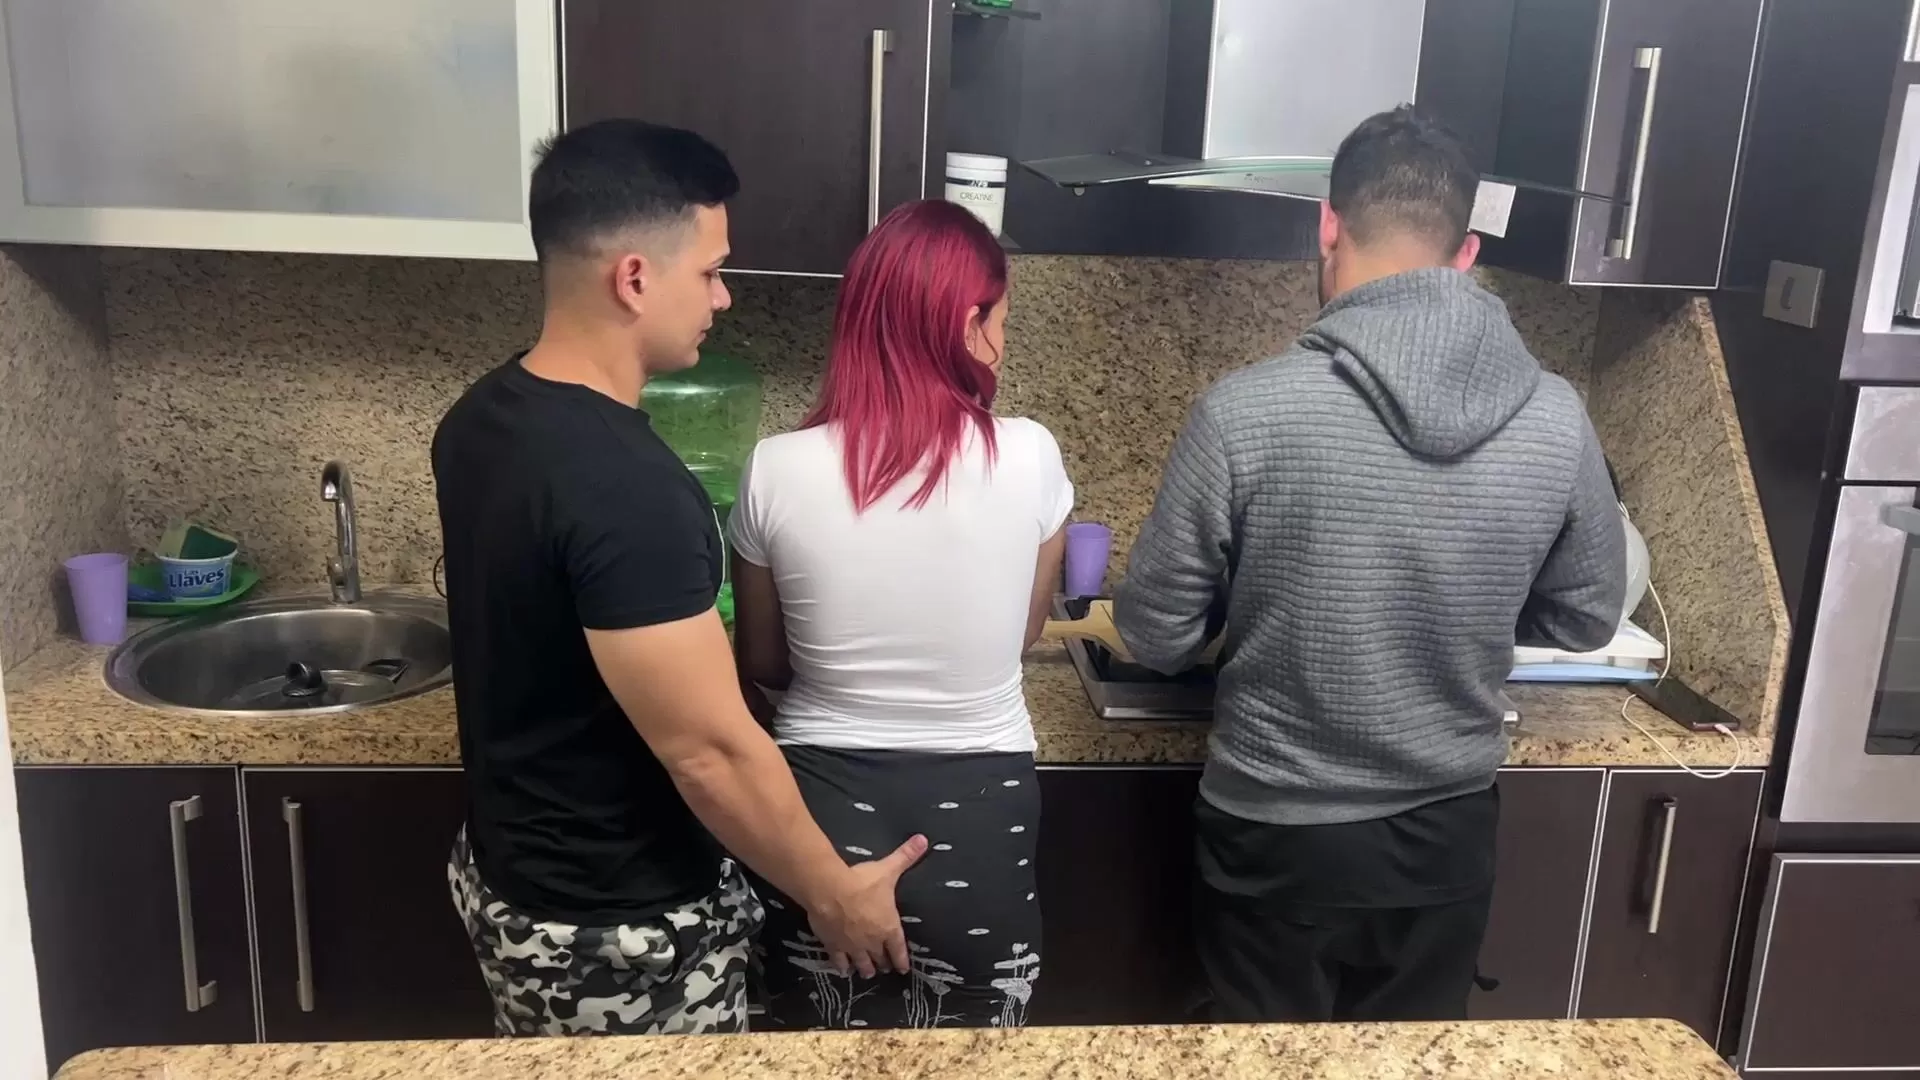 cheting wife in front her hasbendkitchine